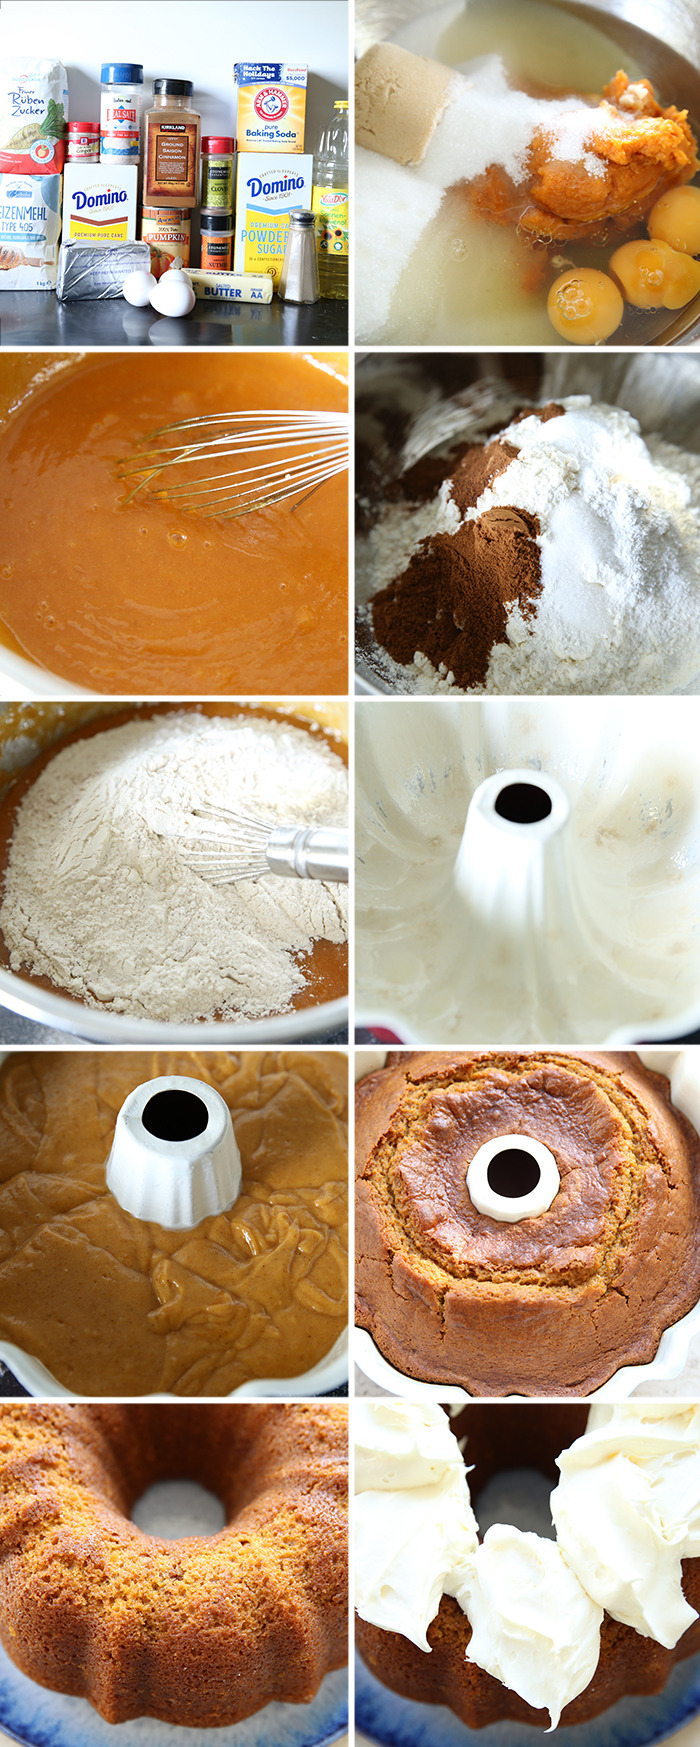 10-photo picture collage of step-by-step photos of how to make pumpkin bundt cake with cream cheese frosting.